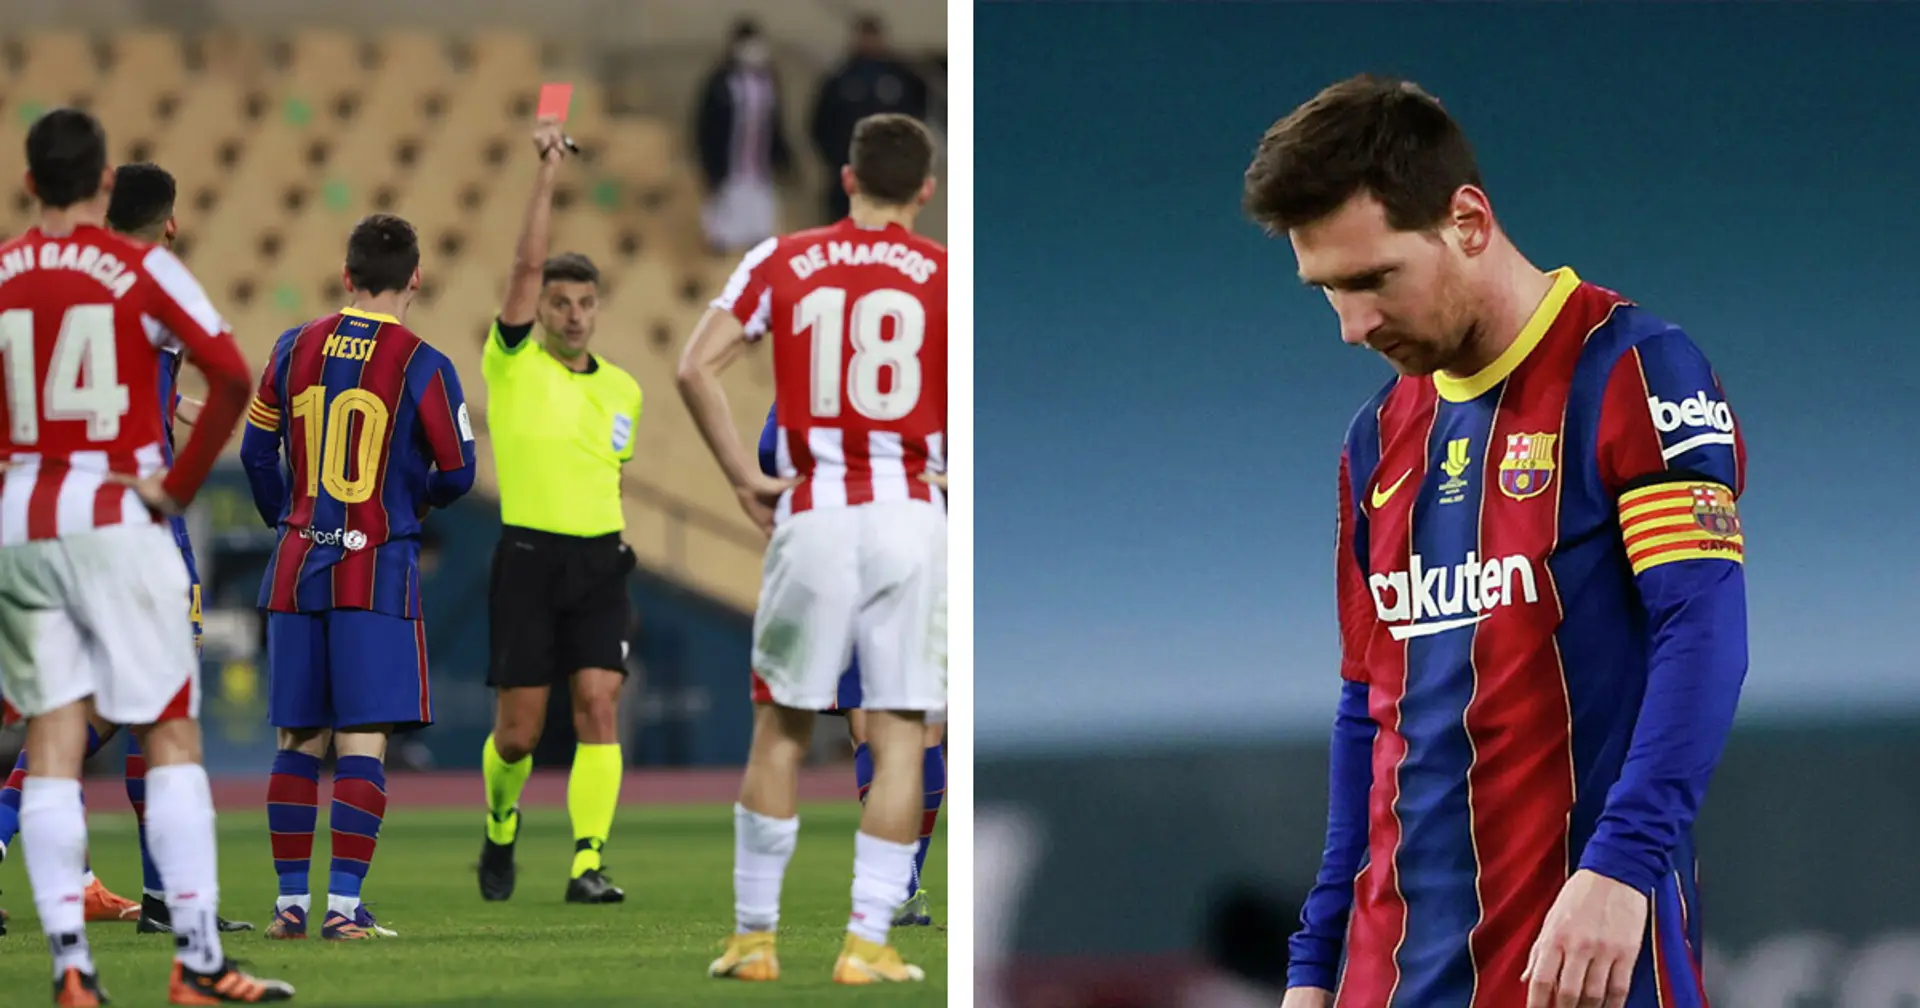 Leo Messi to miss Elche clash, Barcelona's appeal on 2-game ban rejected: RAC1